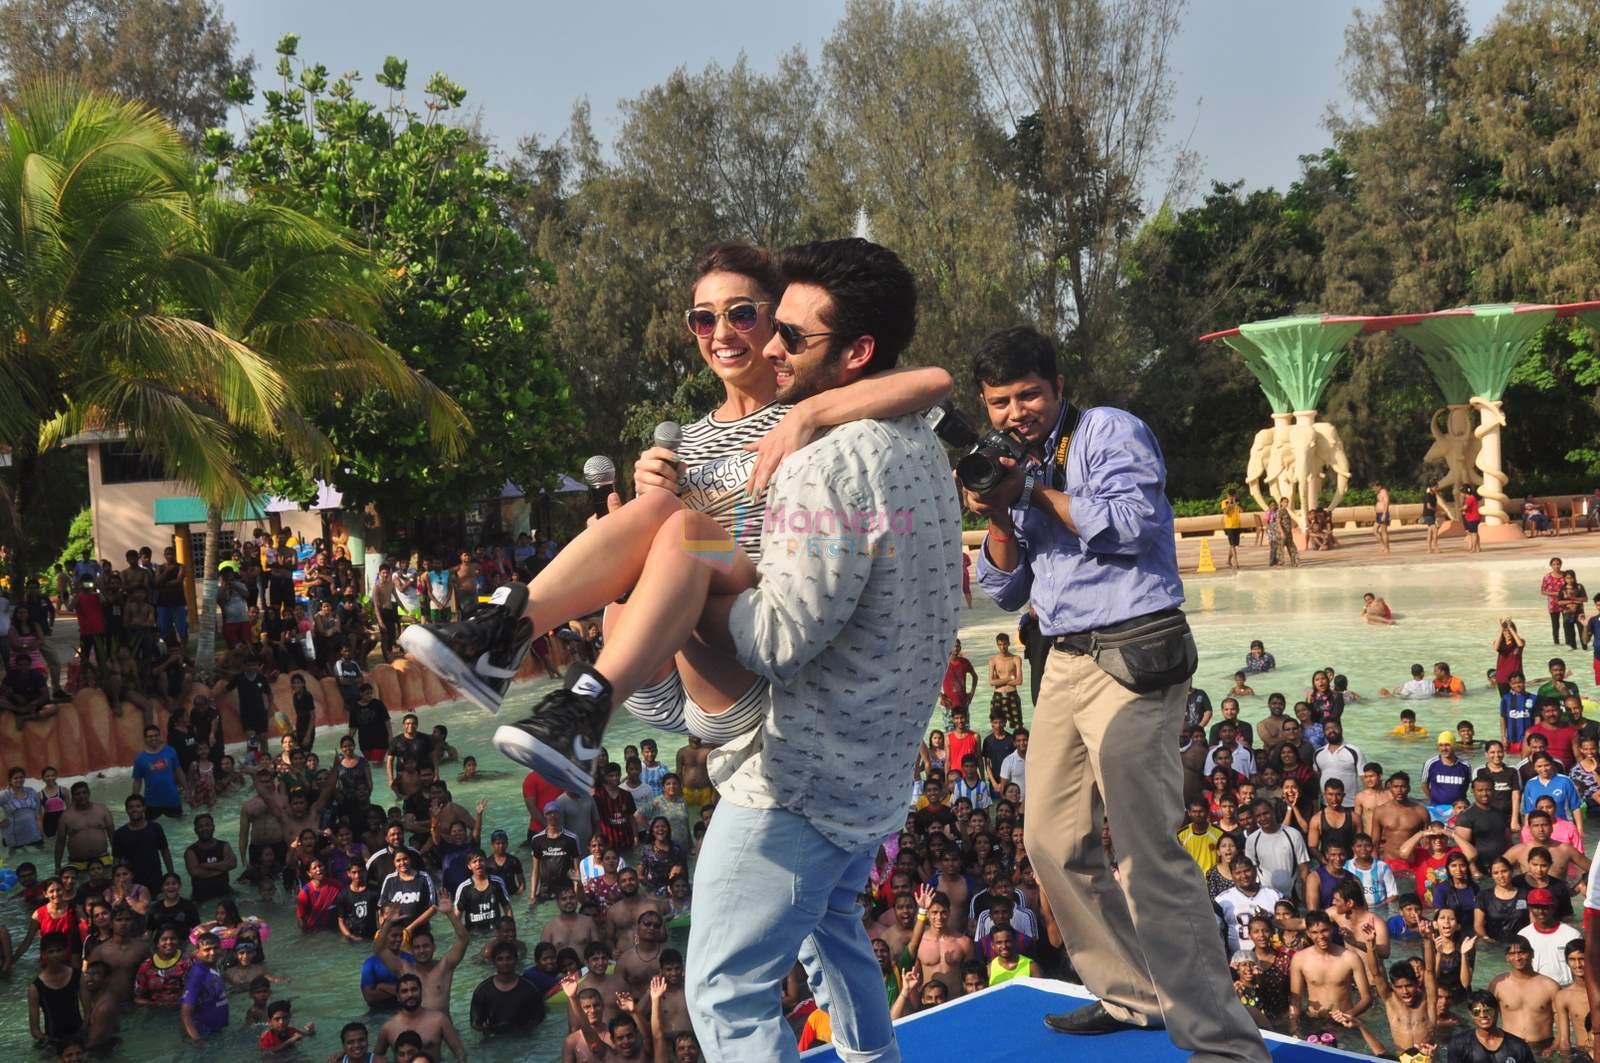 Jackky Bhagnani, Lauren Gottlieb at Welcome to Karachi promotions in Water Kingdom on 26th April 2015